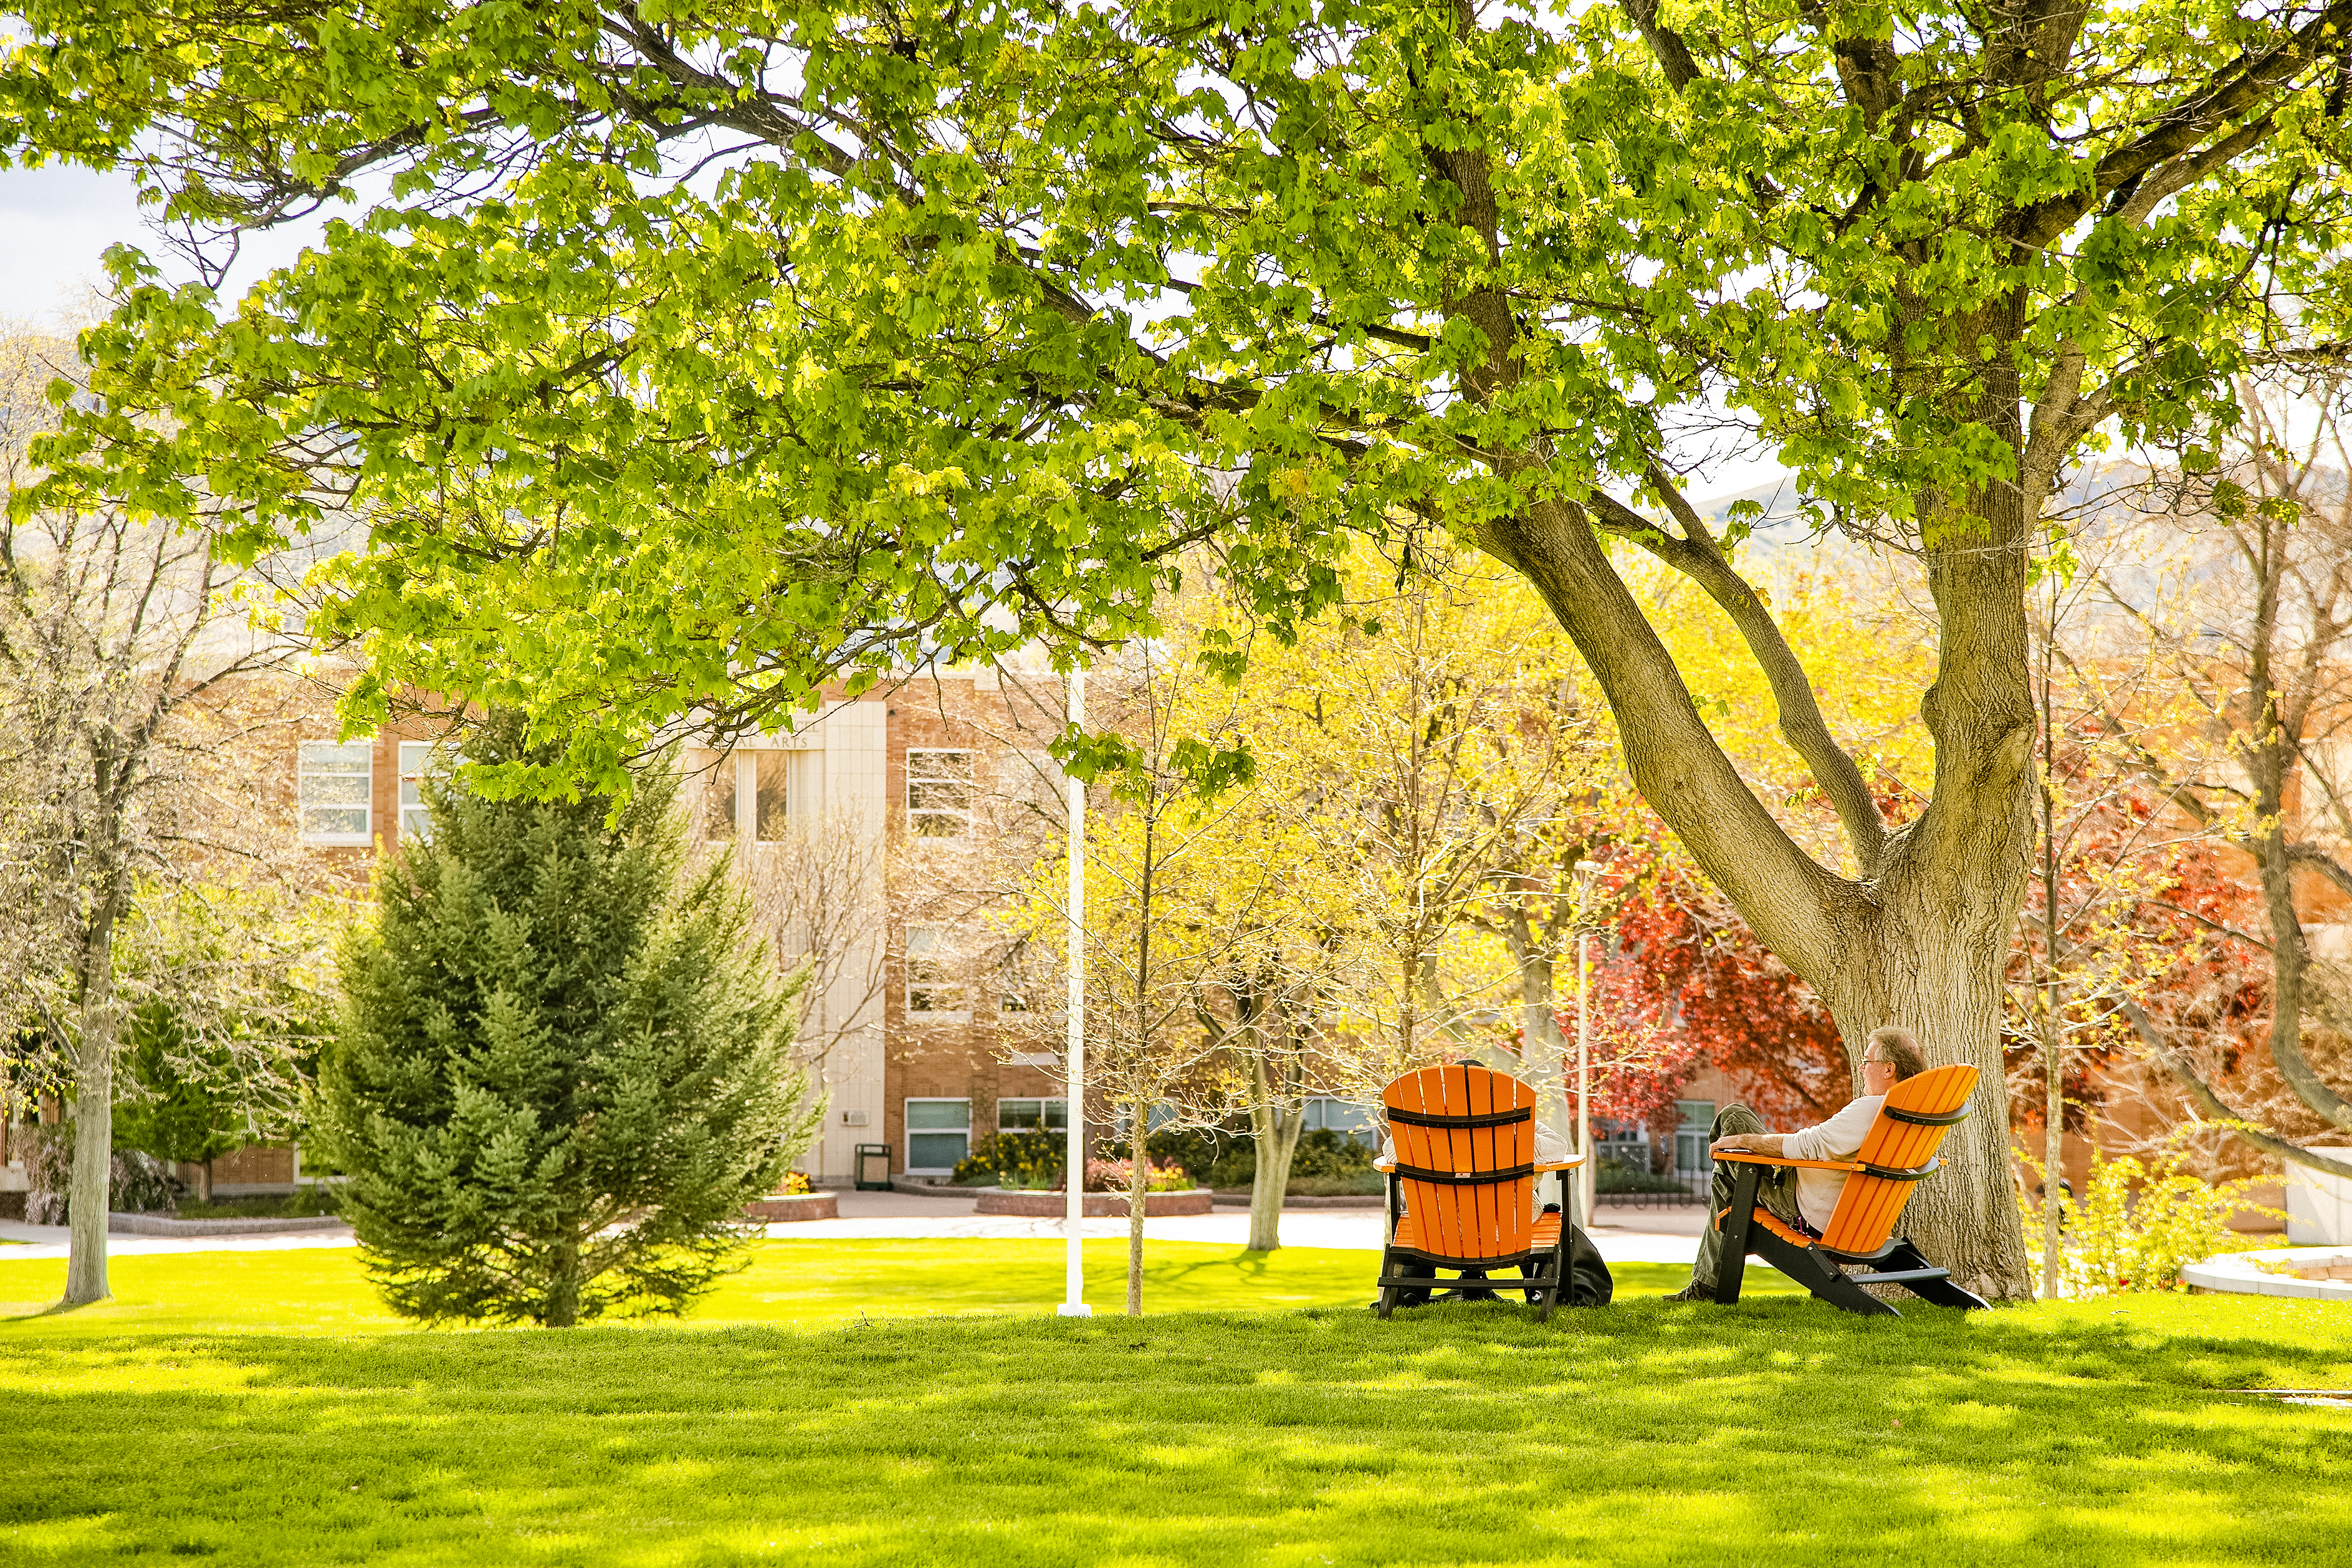 Students sitting in chairs next to a tree on the Quad